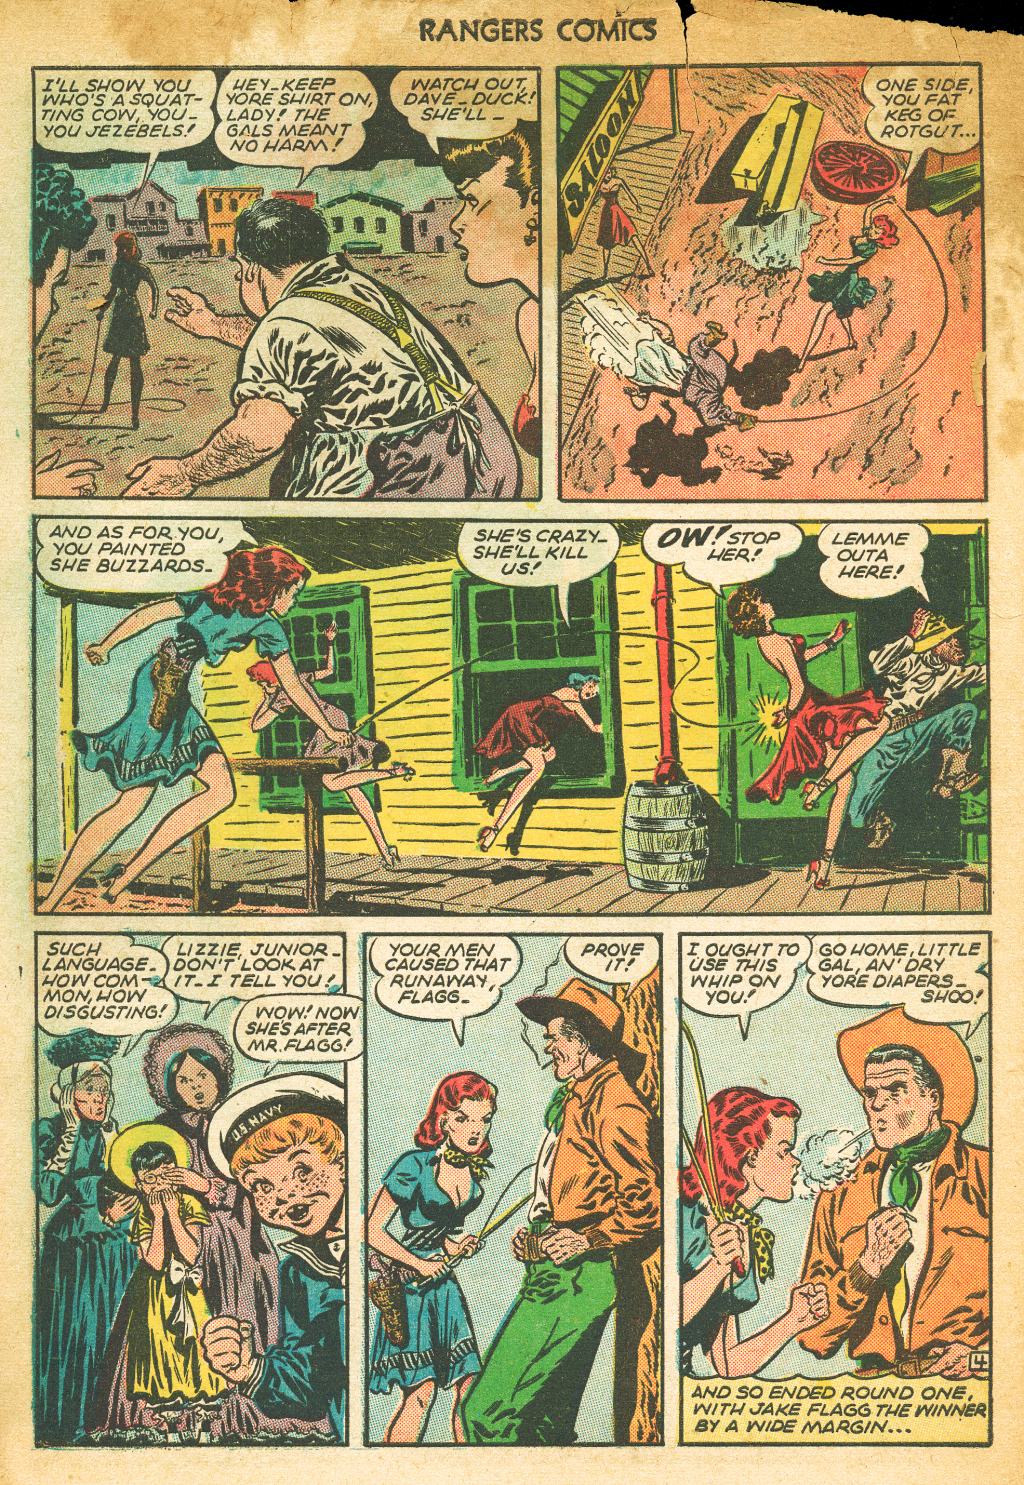 page 4 from rangers comics #25